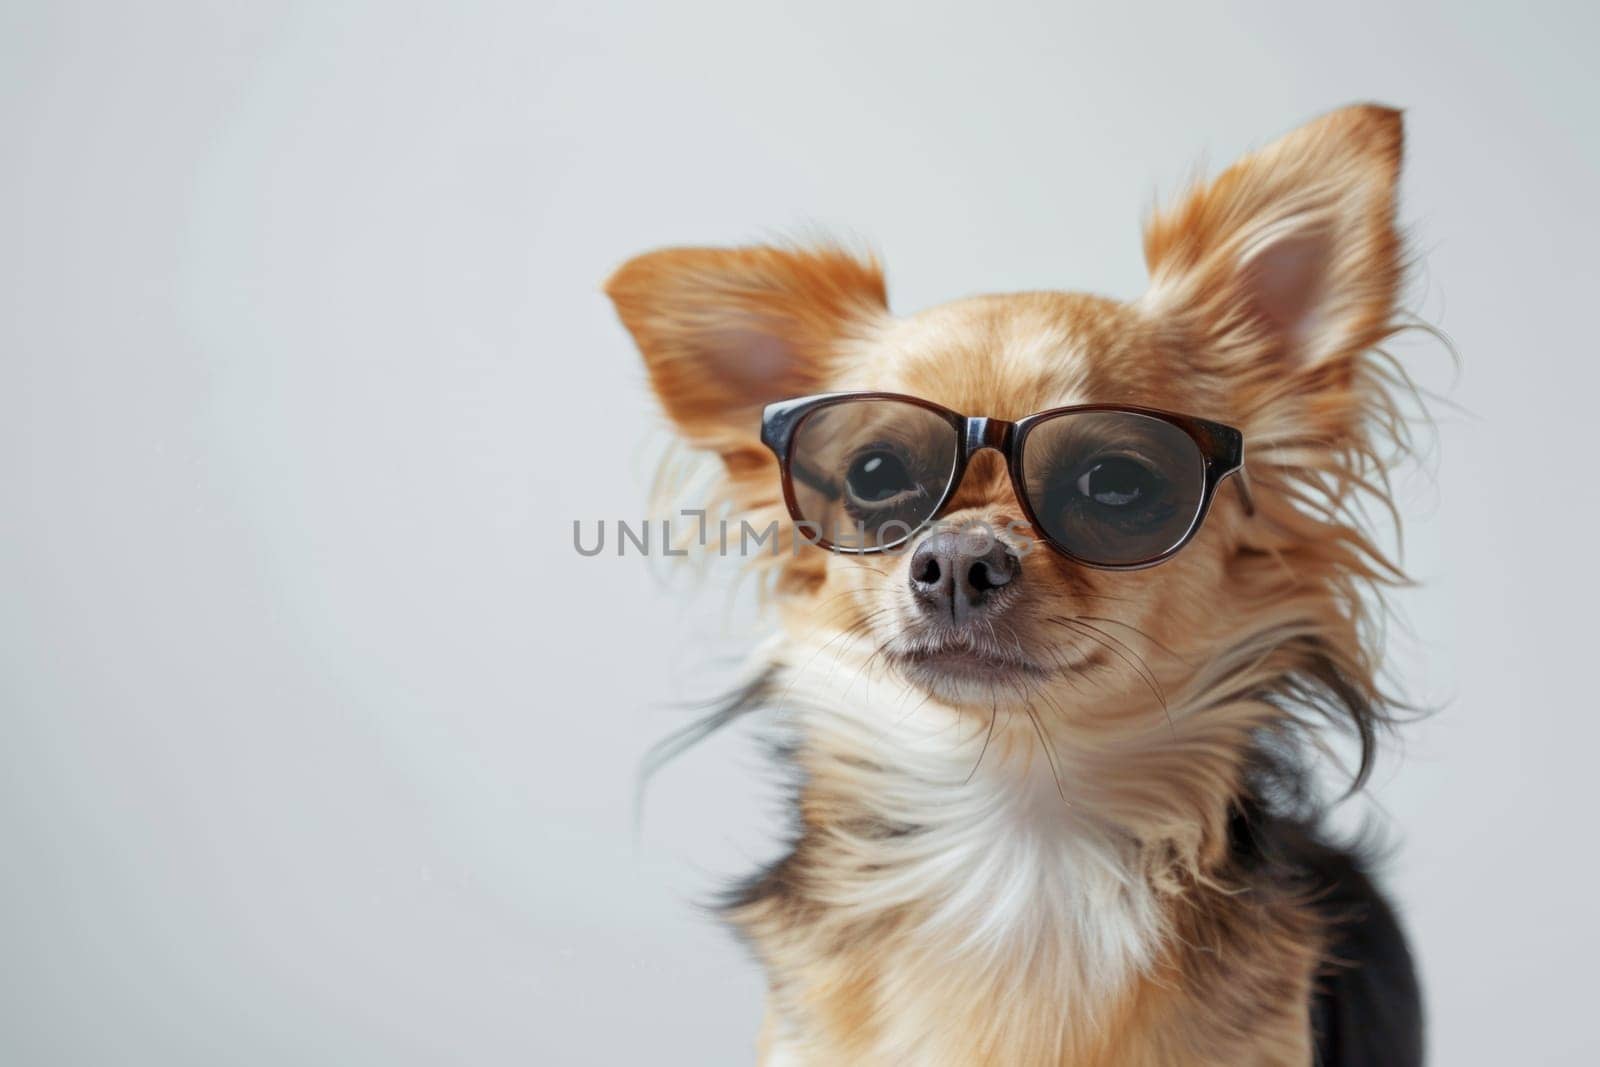 Studio shot of a smiling chihuahua dog win glasses isolated on white background with copy space.